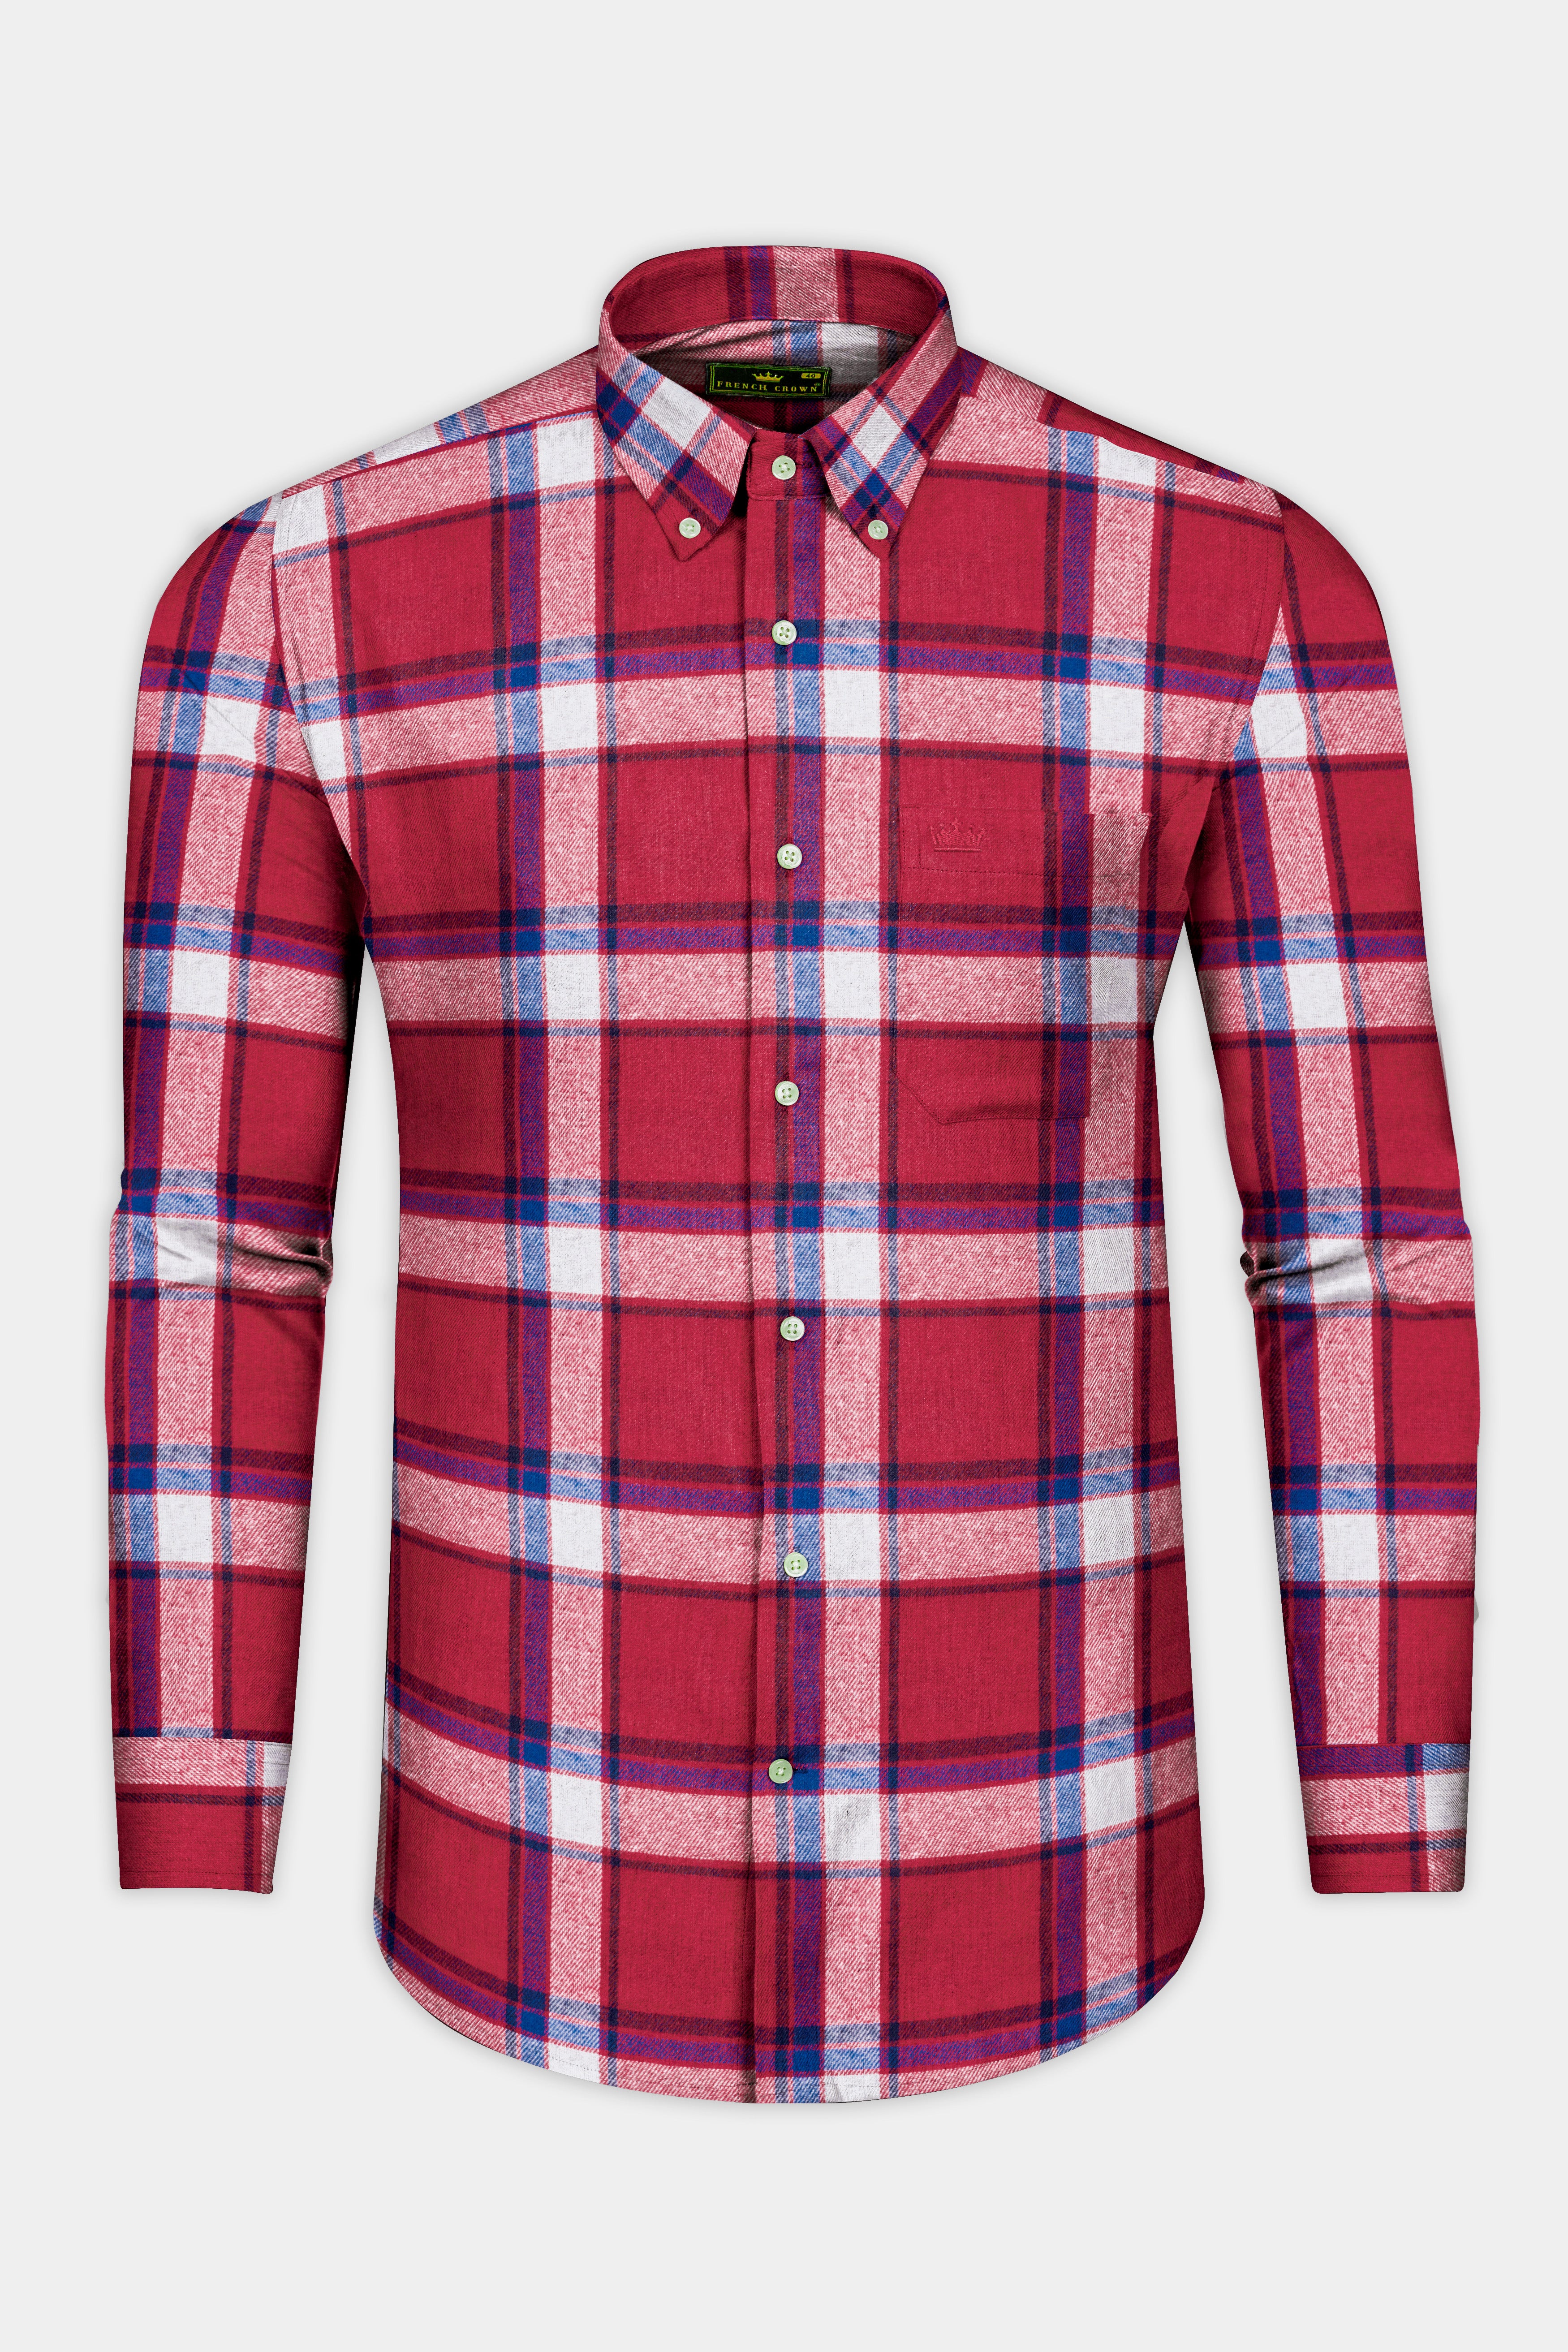 Vivid Auburn Red with Downriver Blue and White Plaid Flannel shirt